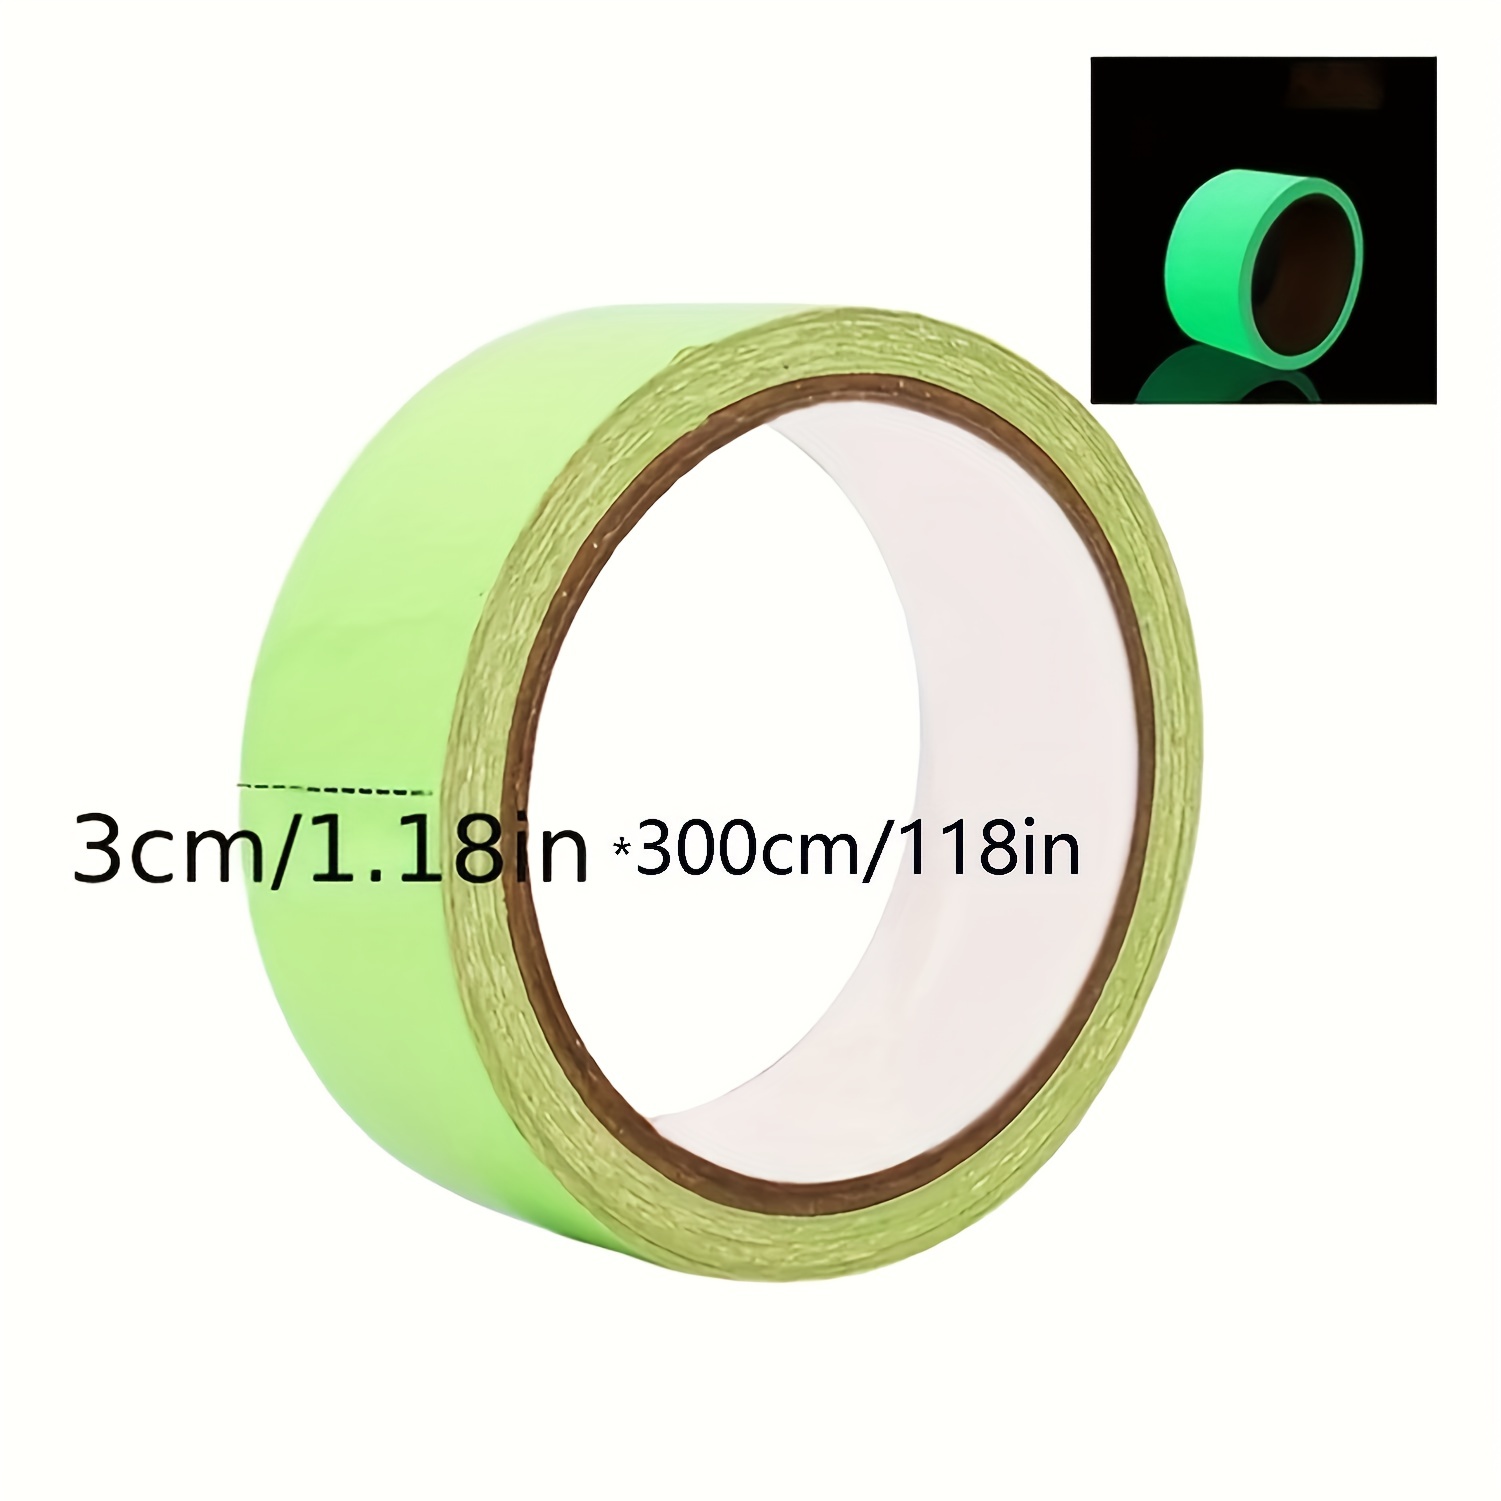 glow in the dark tape bright rechargeable long lasting fluorescent tape luminous tape for halloween night decorations outdoor sports and marking for retailers workshops